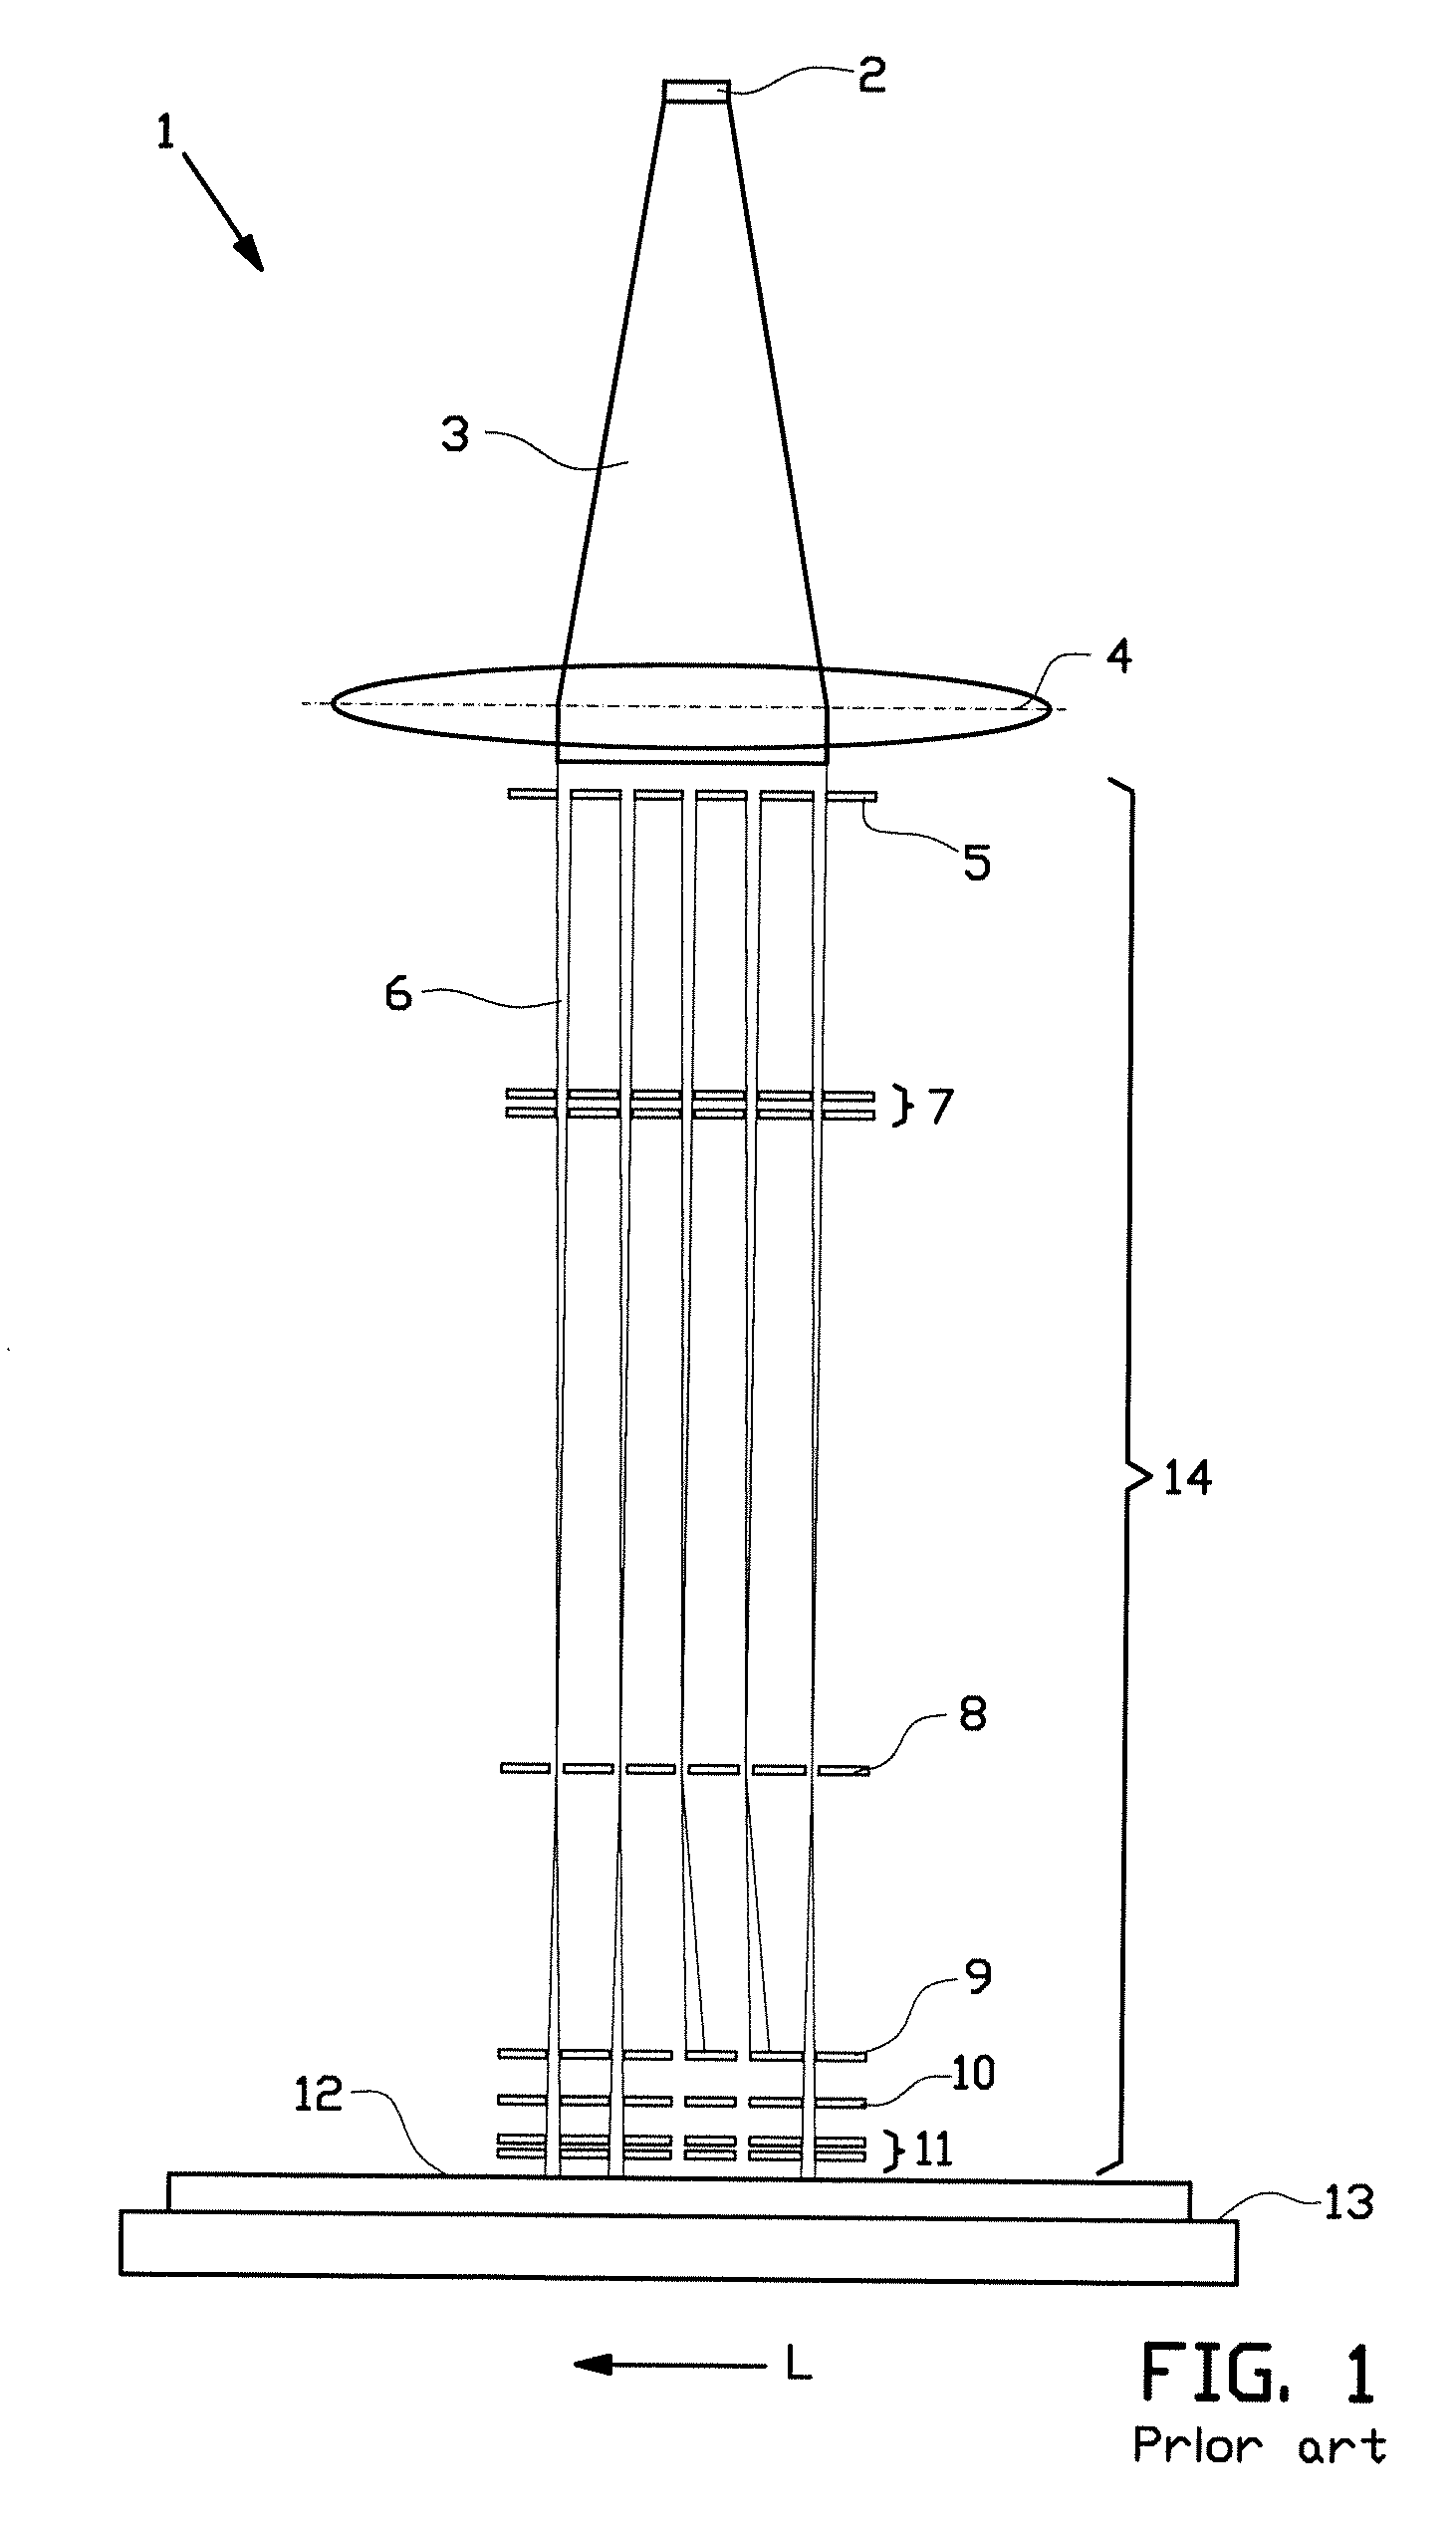 Position determination in a lithography system using a substrate having a partially reflective position mark